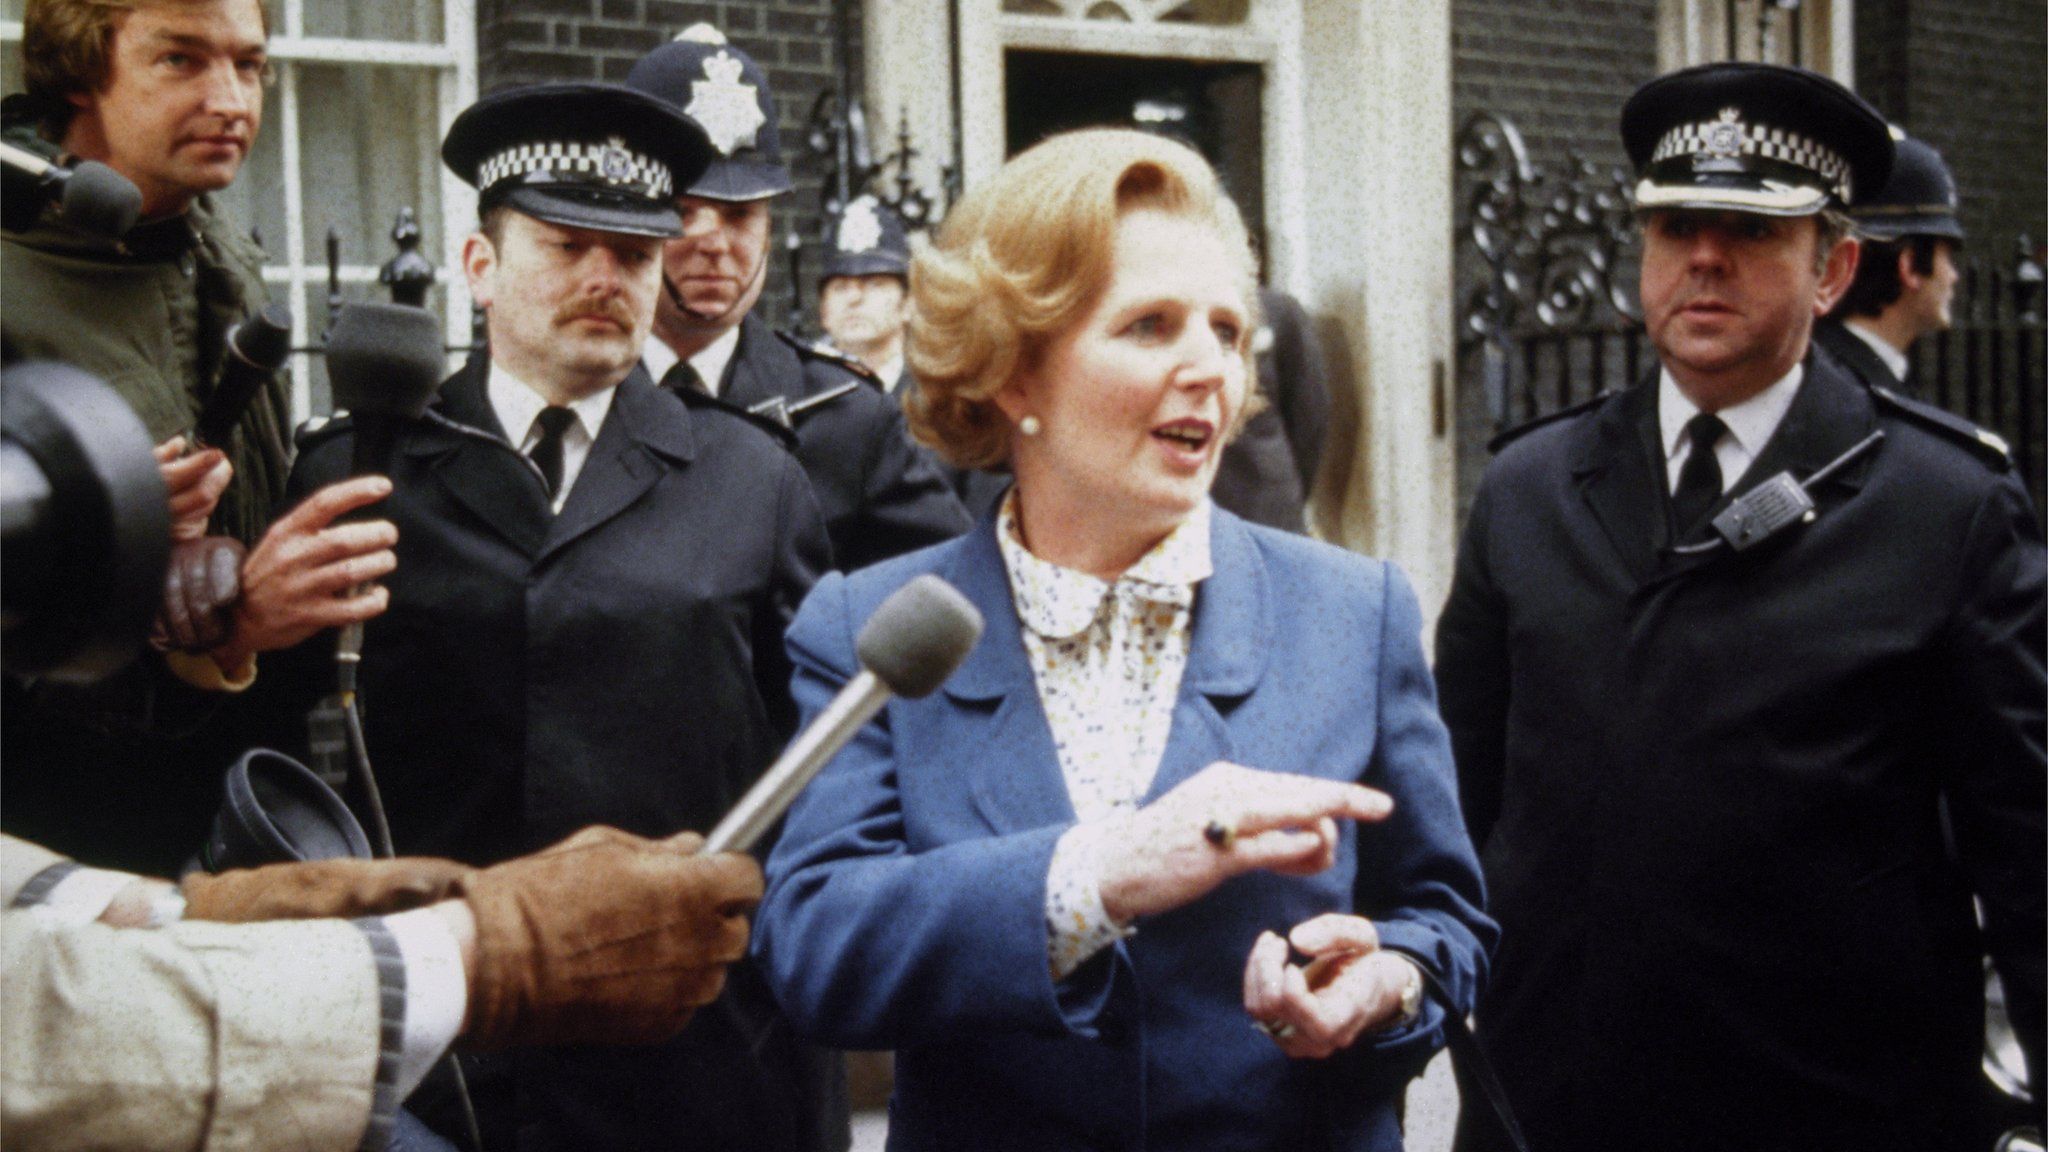 Margaret Thatcher arrives at Number Ten Downing Strret as Prime Minister, May 4th 1979